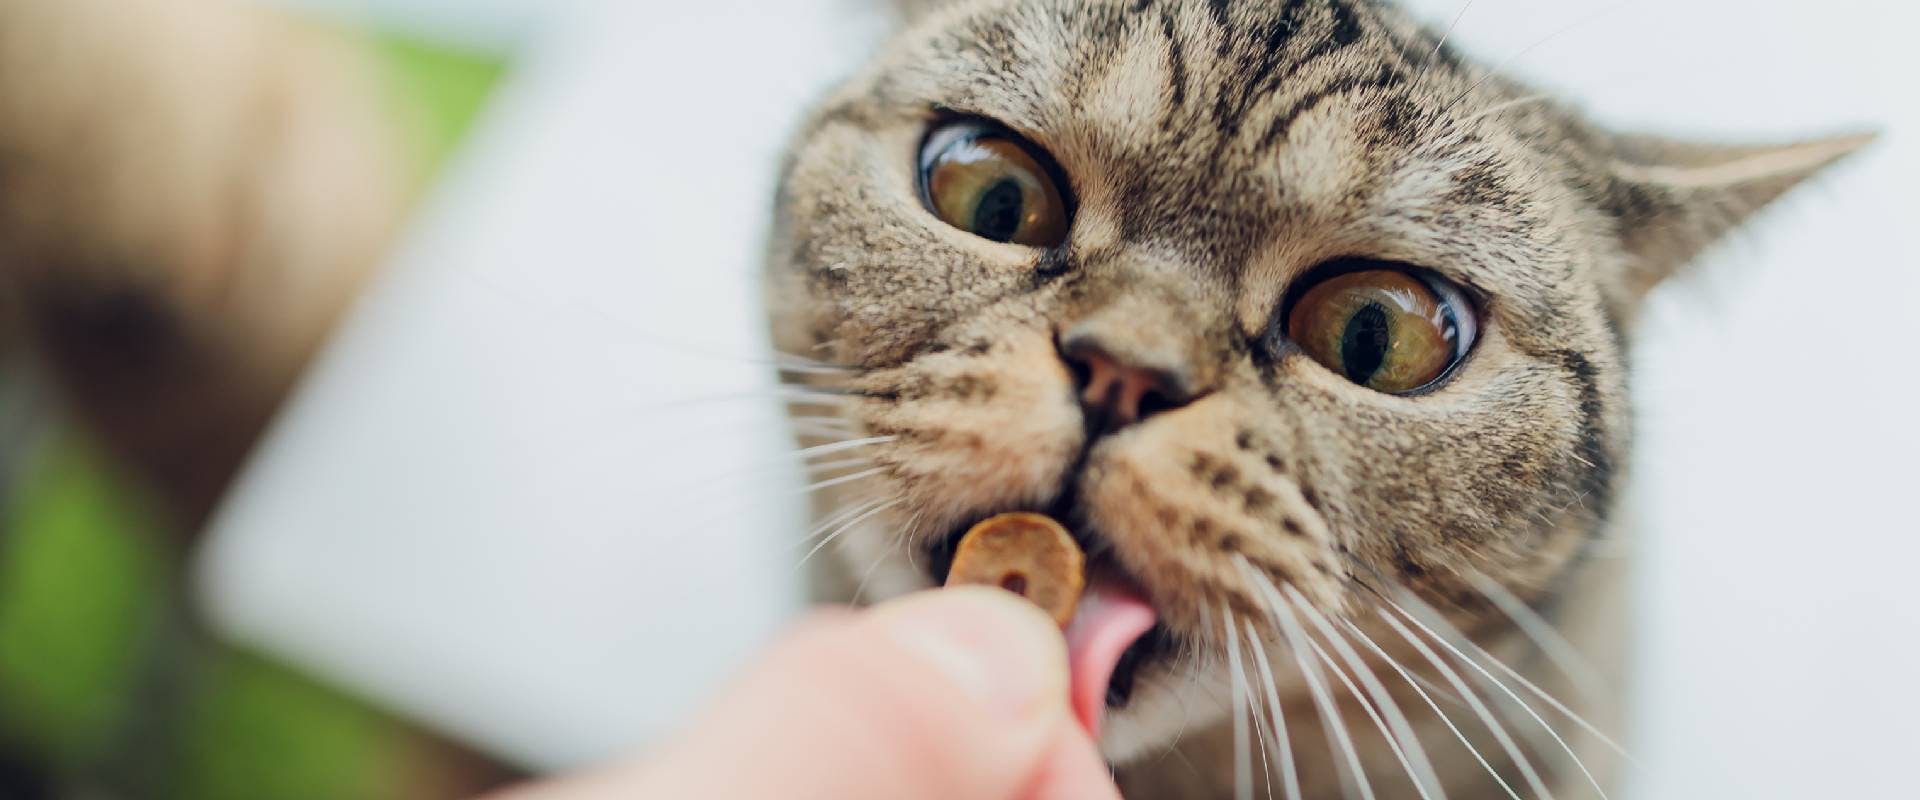 Close-up of a cat taking a treat from someone's hand